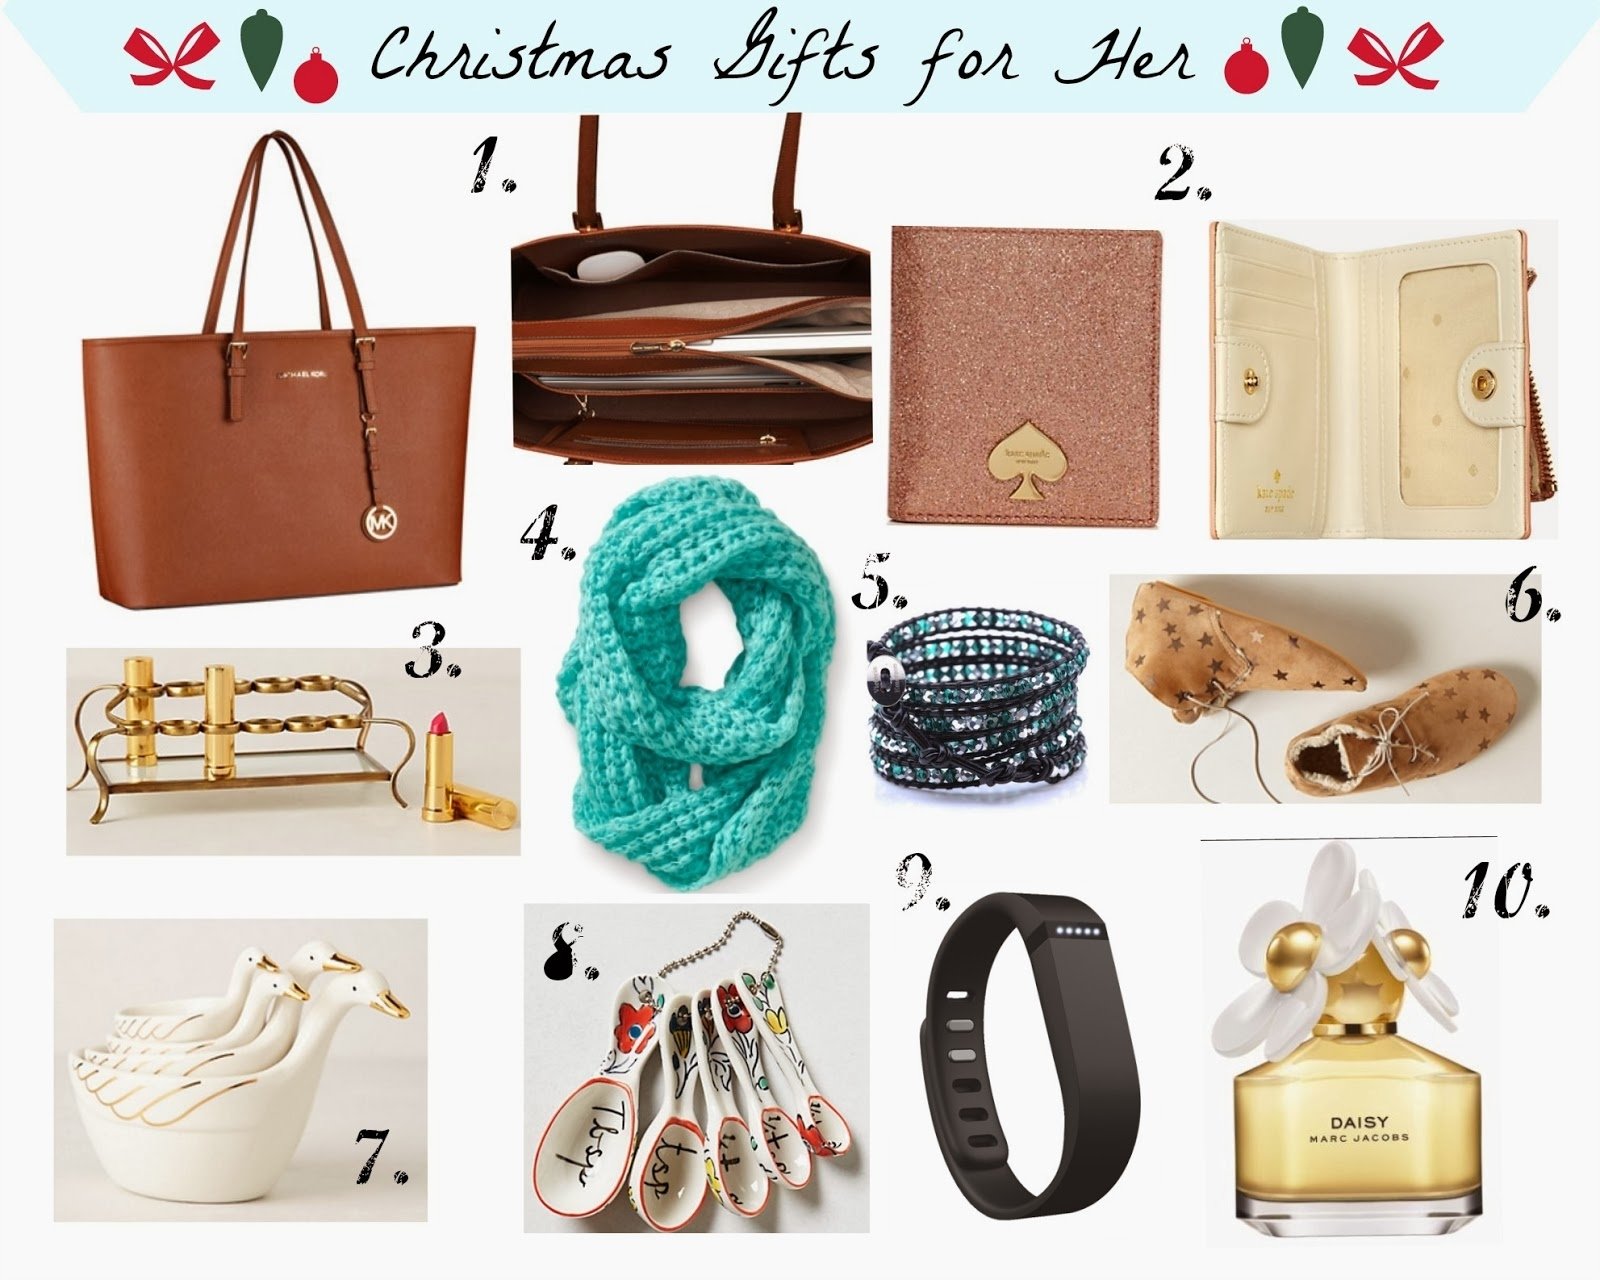 Best Christmas Gifts For Your Wife: 70 Thoughtful Ideas